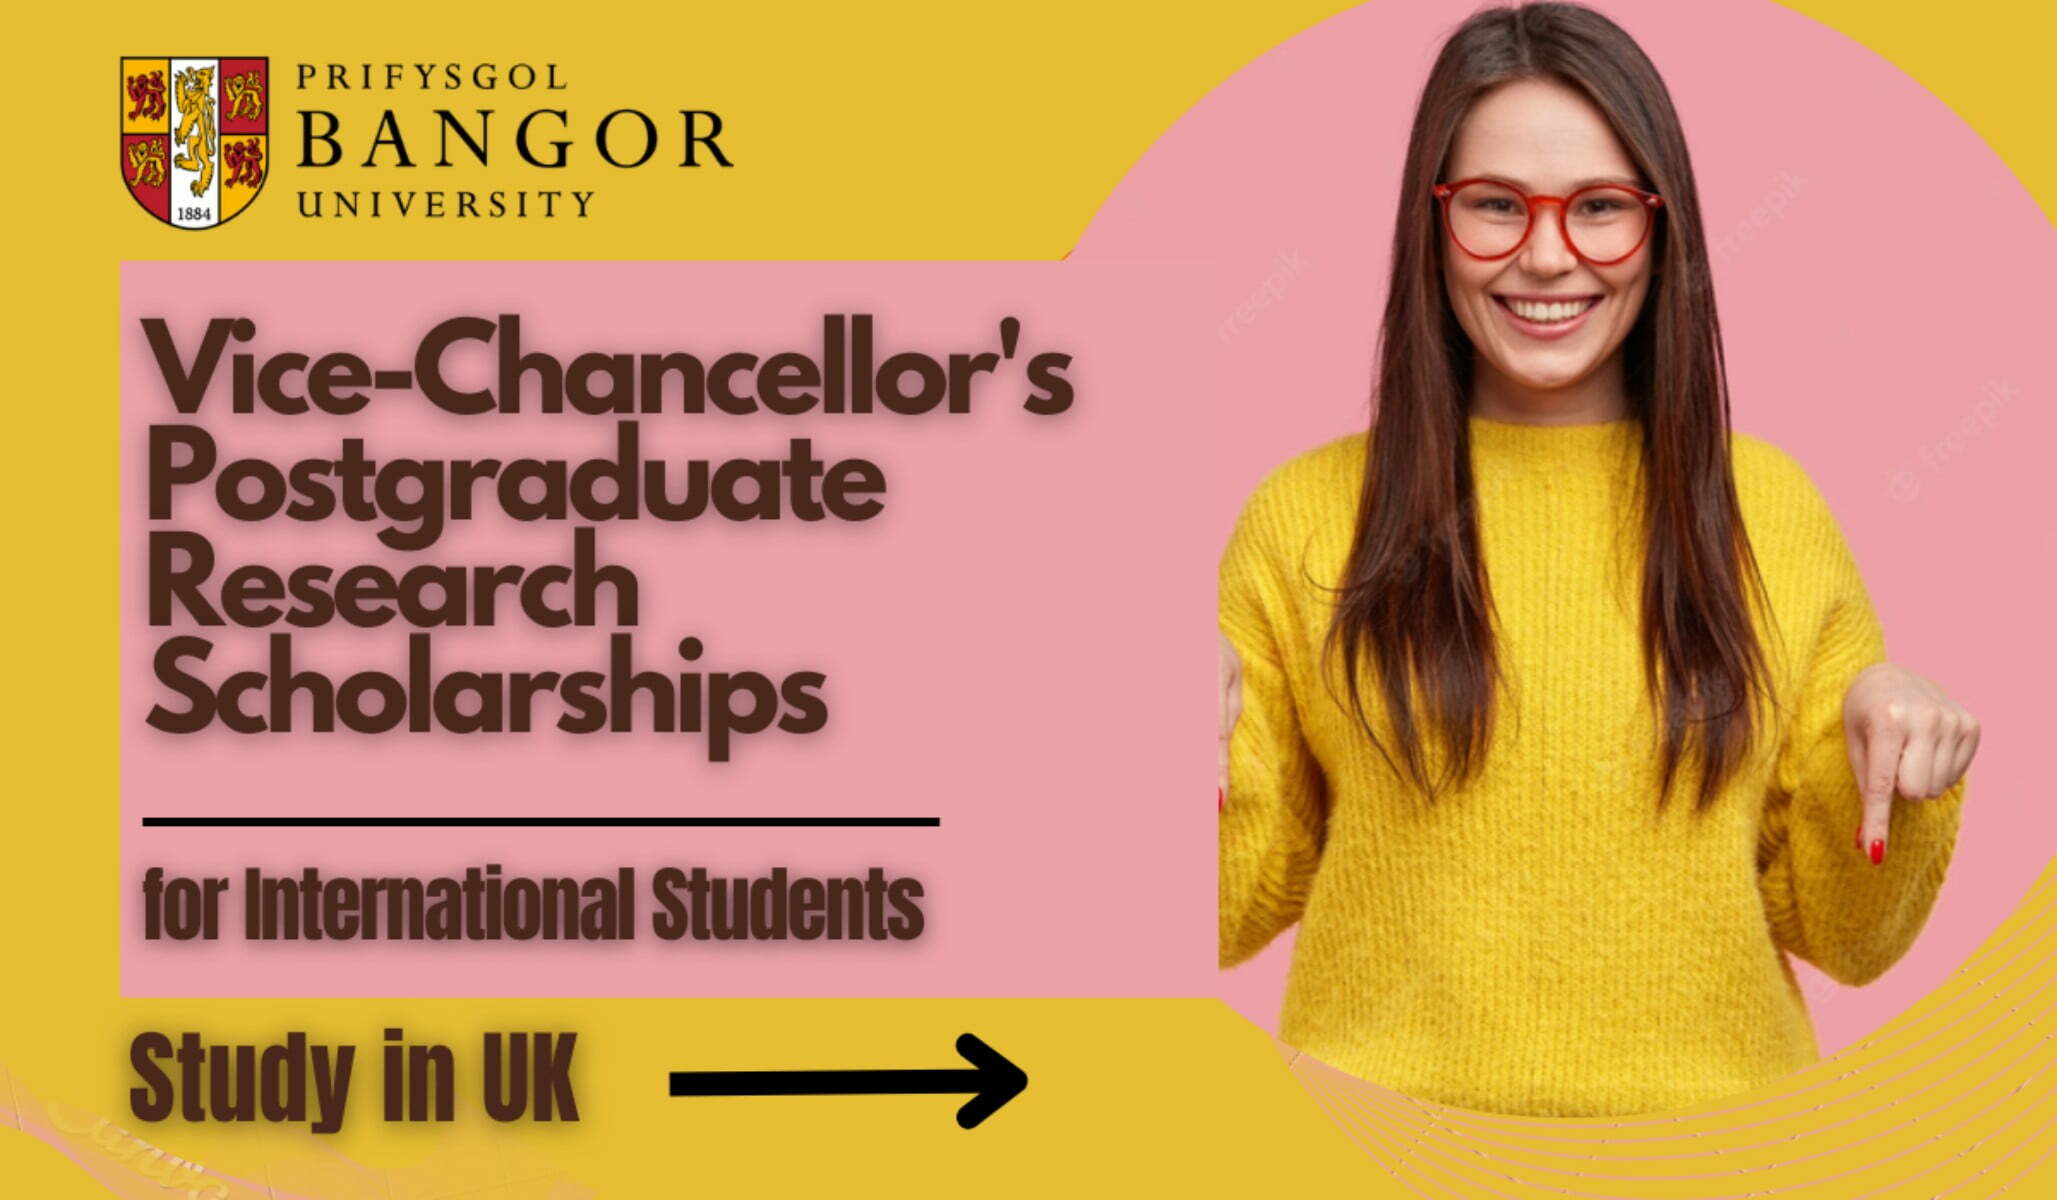 Vice-Chancellor’s Research Scholarships 2022 at Bangor University in UK